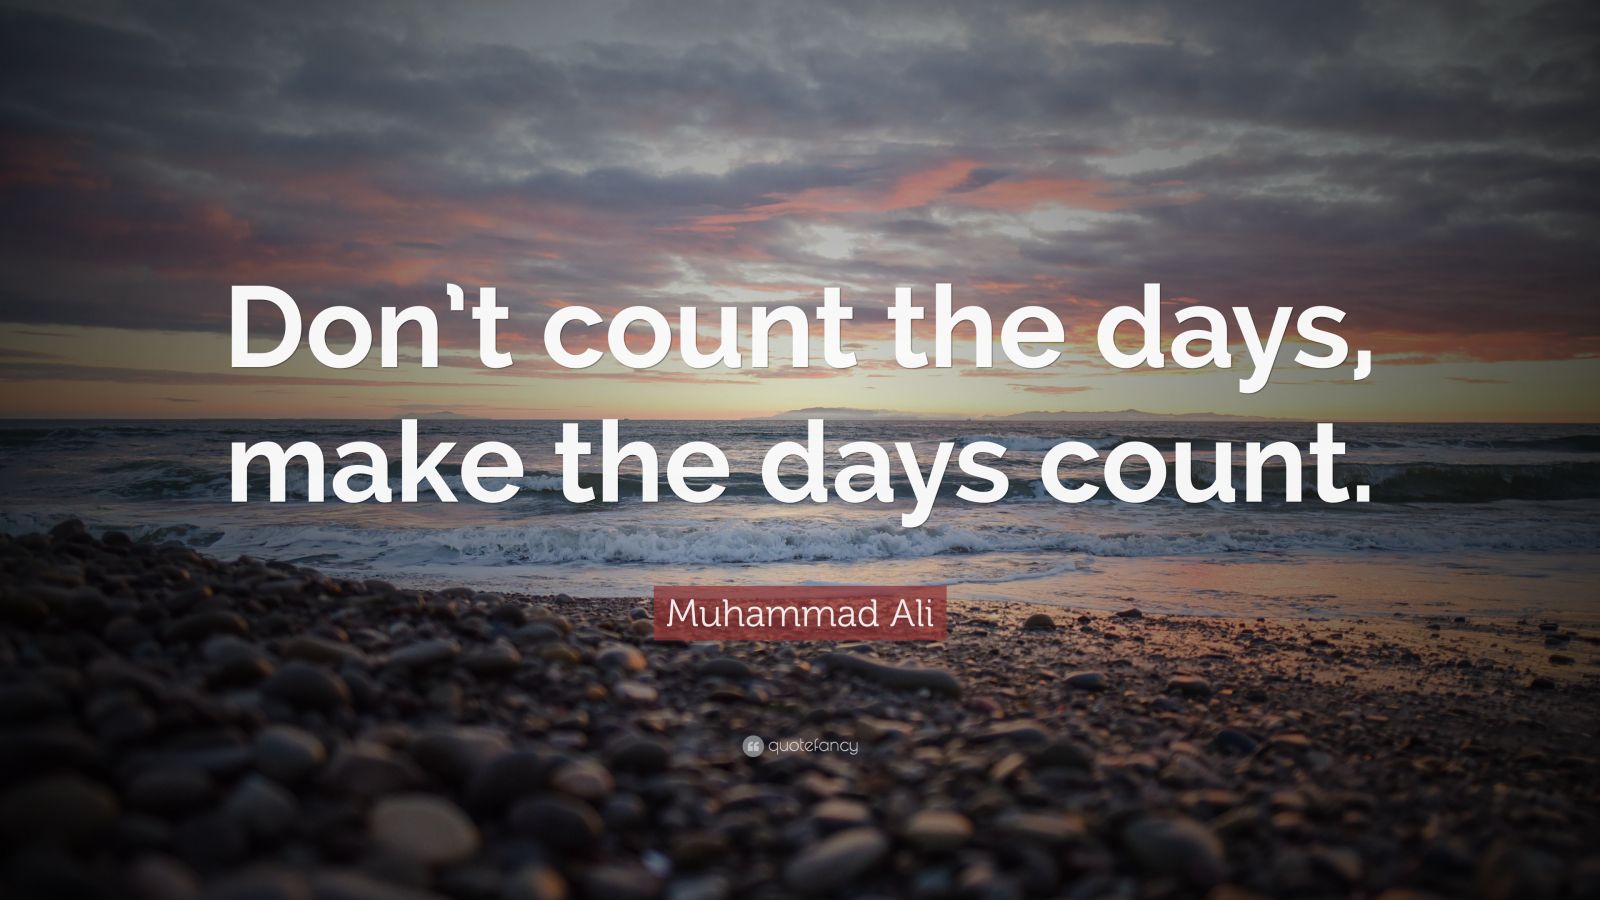 Muhammad Ali Quote: “Don’t count the days, make the days count.” (40